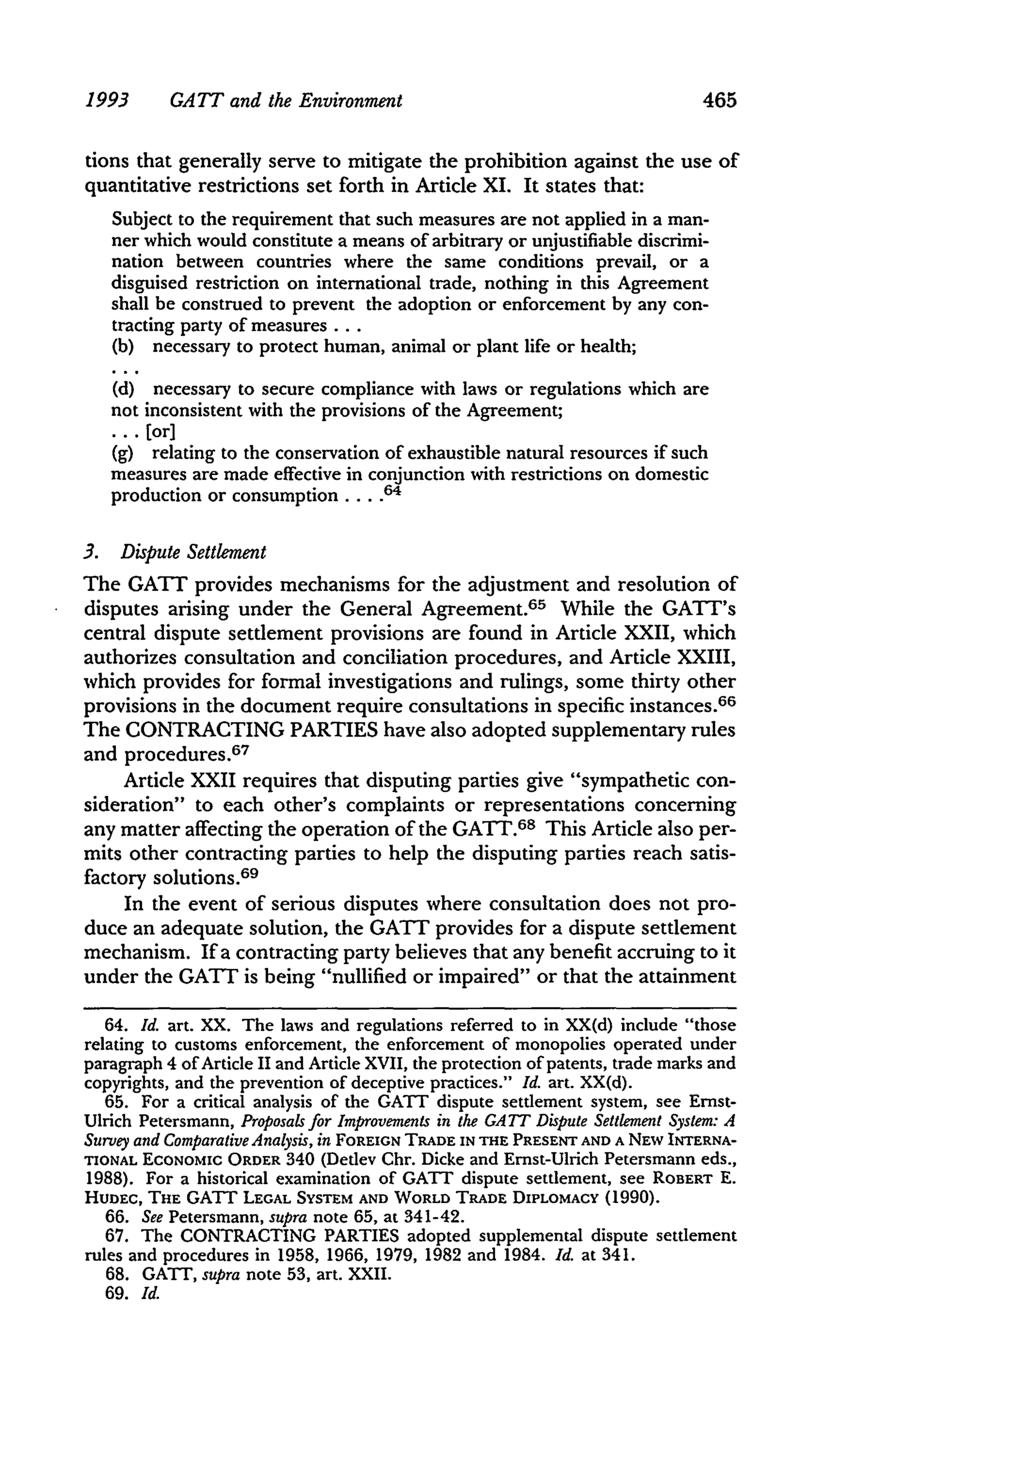 1993 GATT and the Environment tions that generally serve to mitigate the prohibition against the use of quantitative restrictions set forth in Article XI.